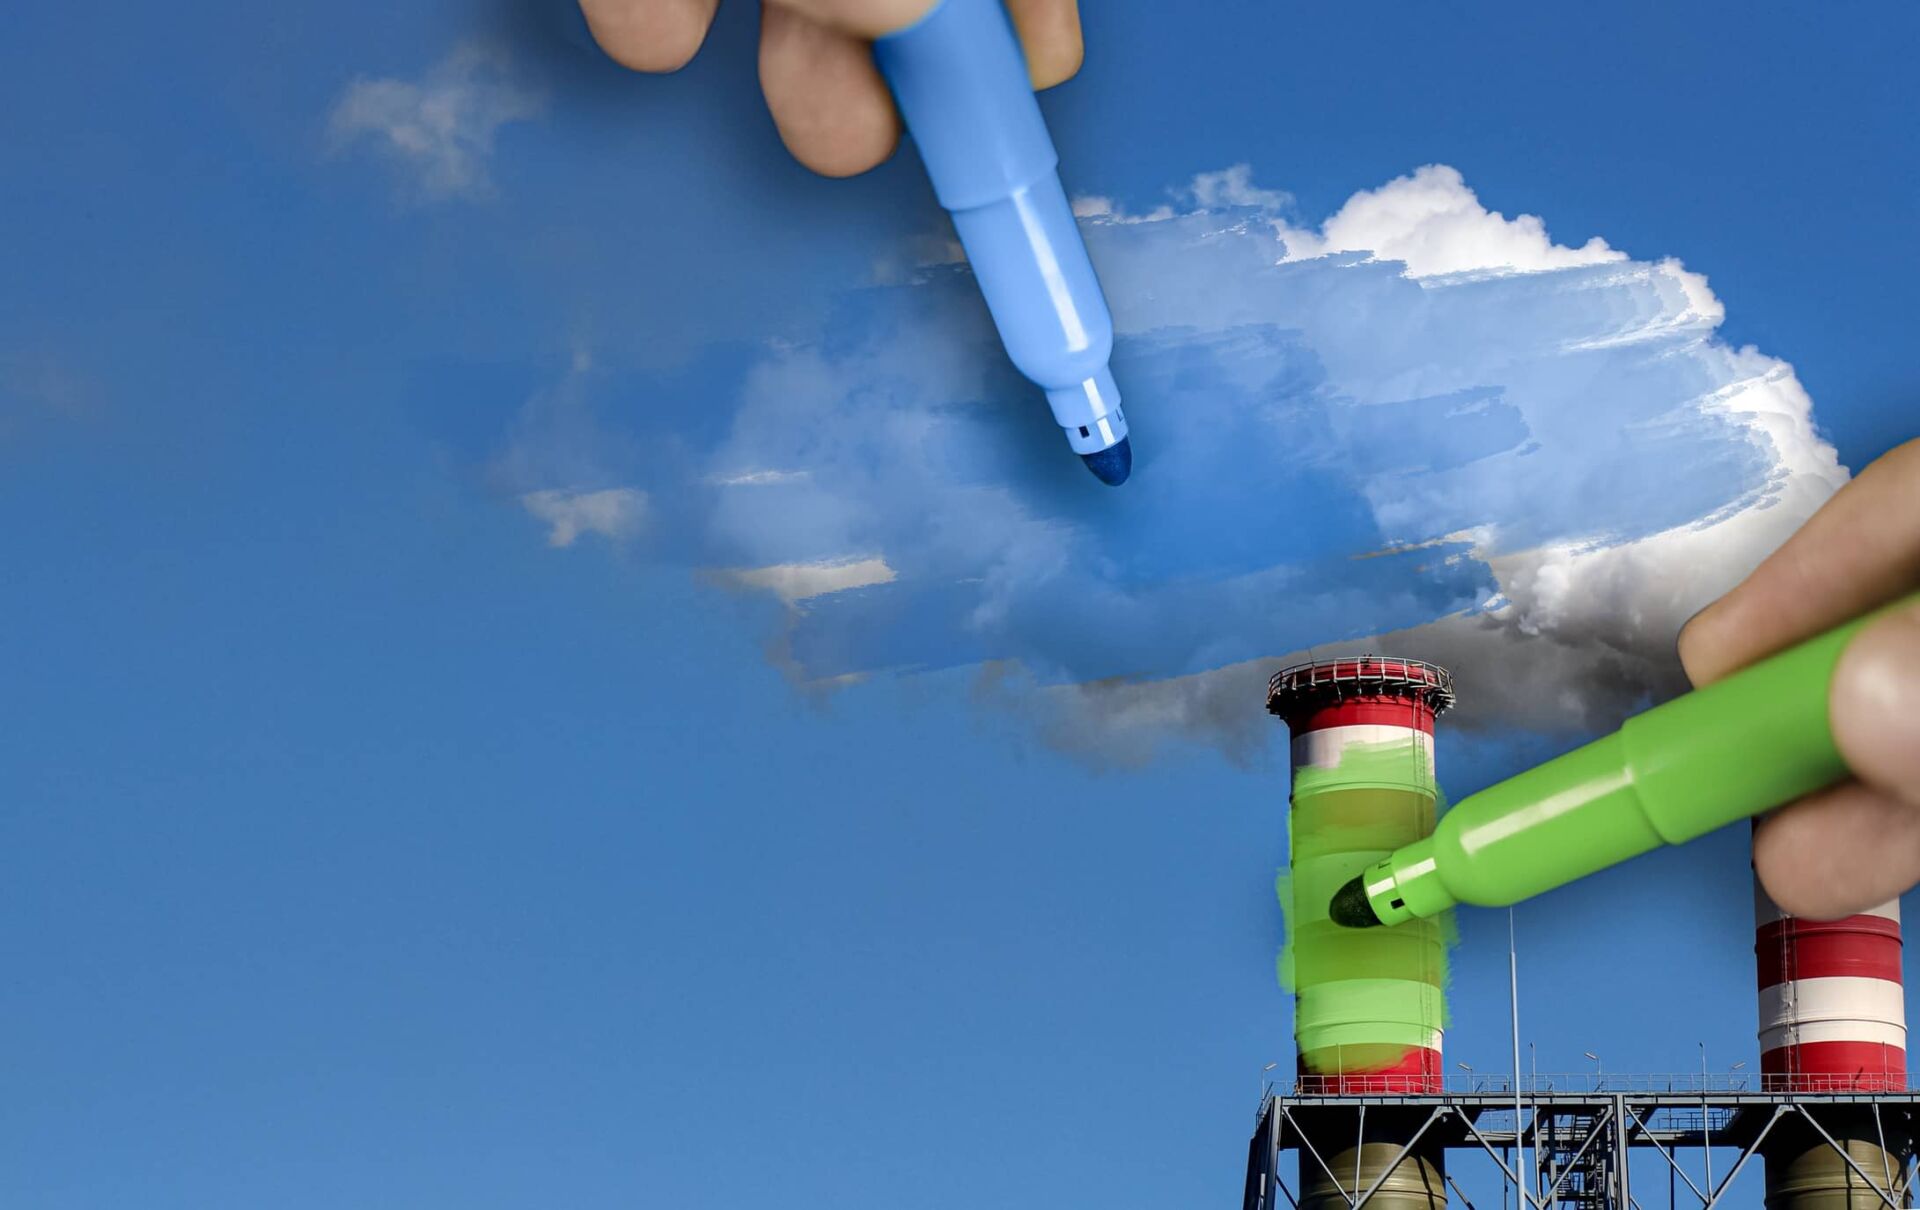 A person colors over a picture of refinery silos with green and blue markers.